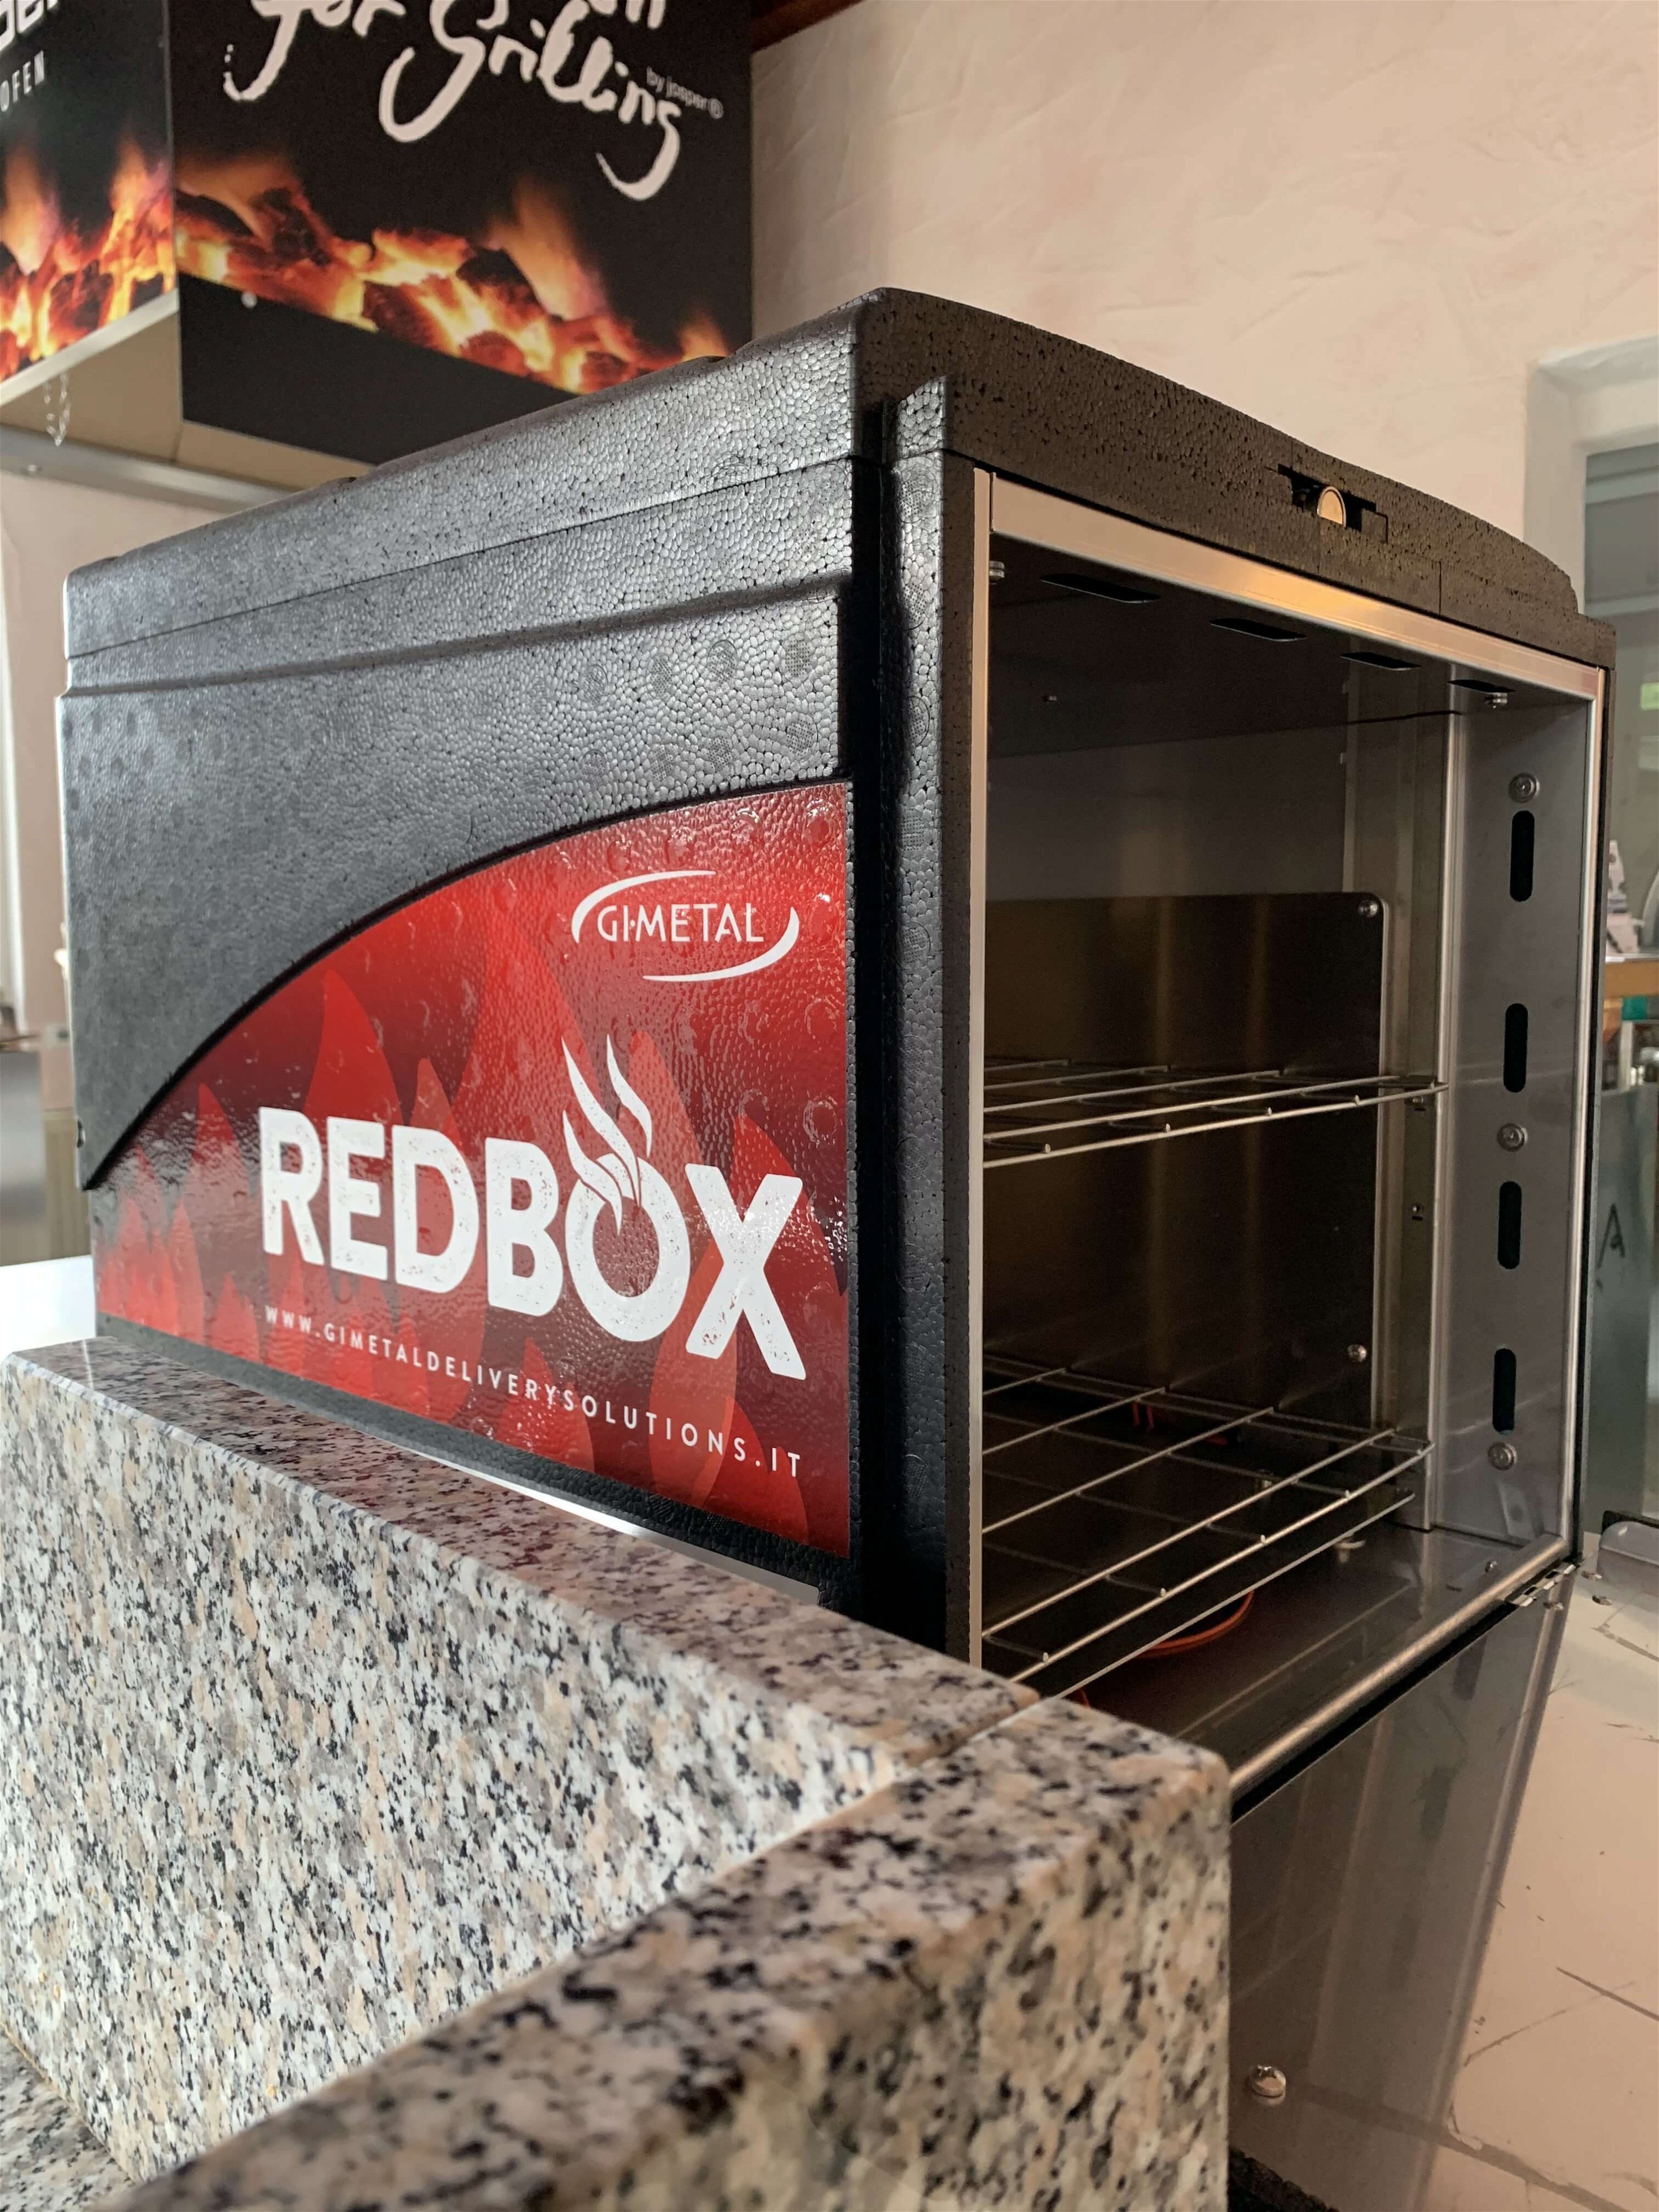 Heated box for pizza delivery services: Gi.Metal Redbox, with thermometer and convection for 12 pizza boxes, 1.2kW